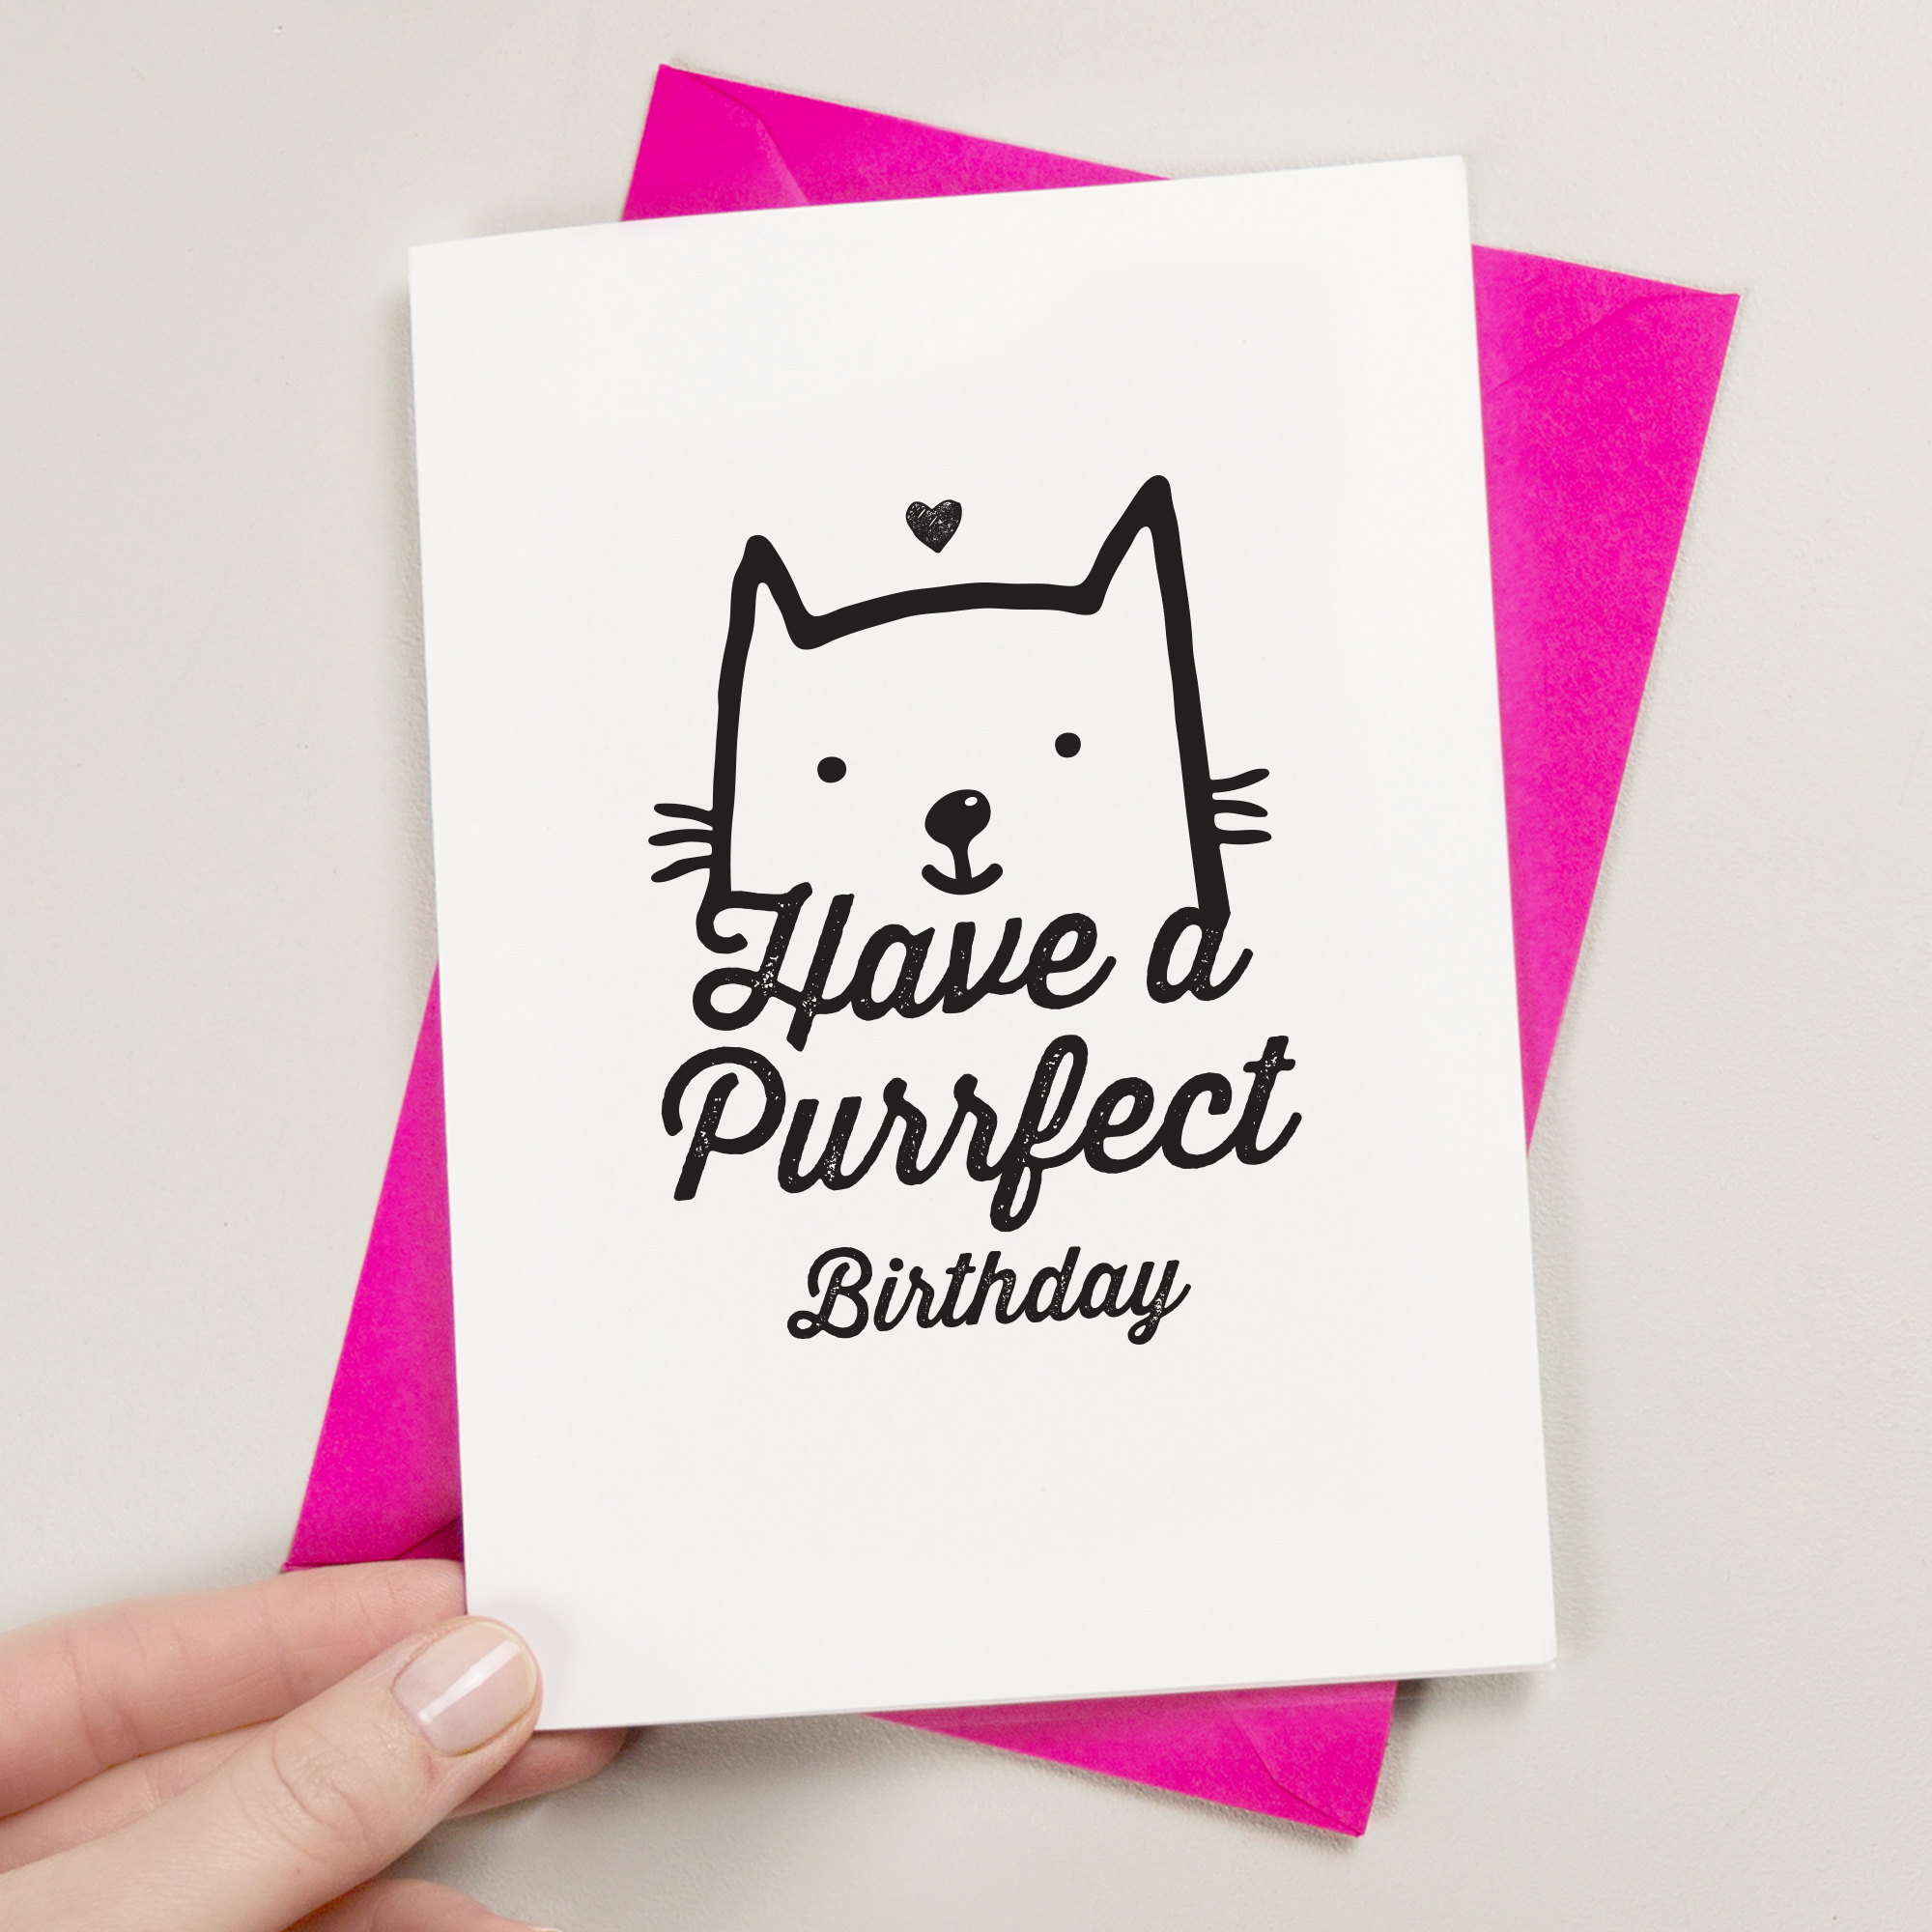 A Purrfect Birthday Card For Cat Lovers - A is for Alphabet